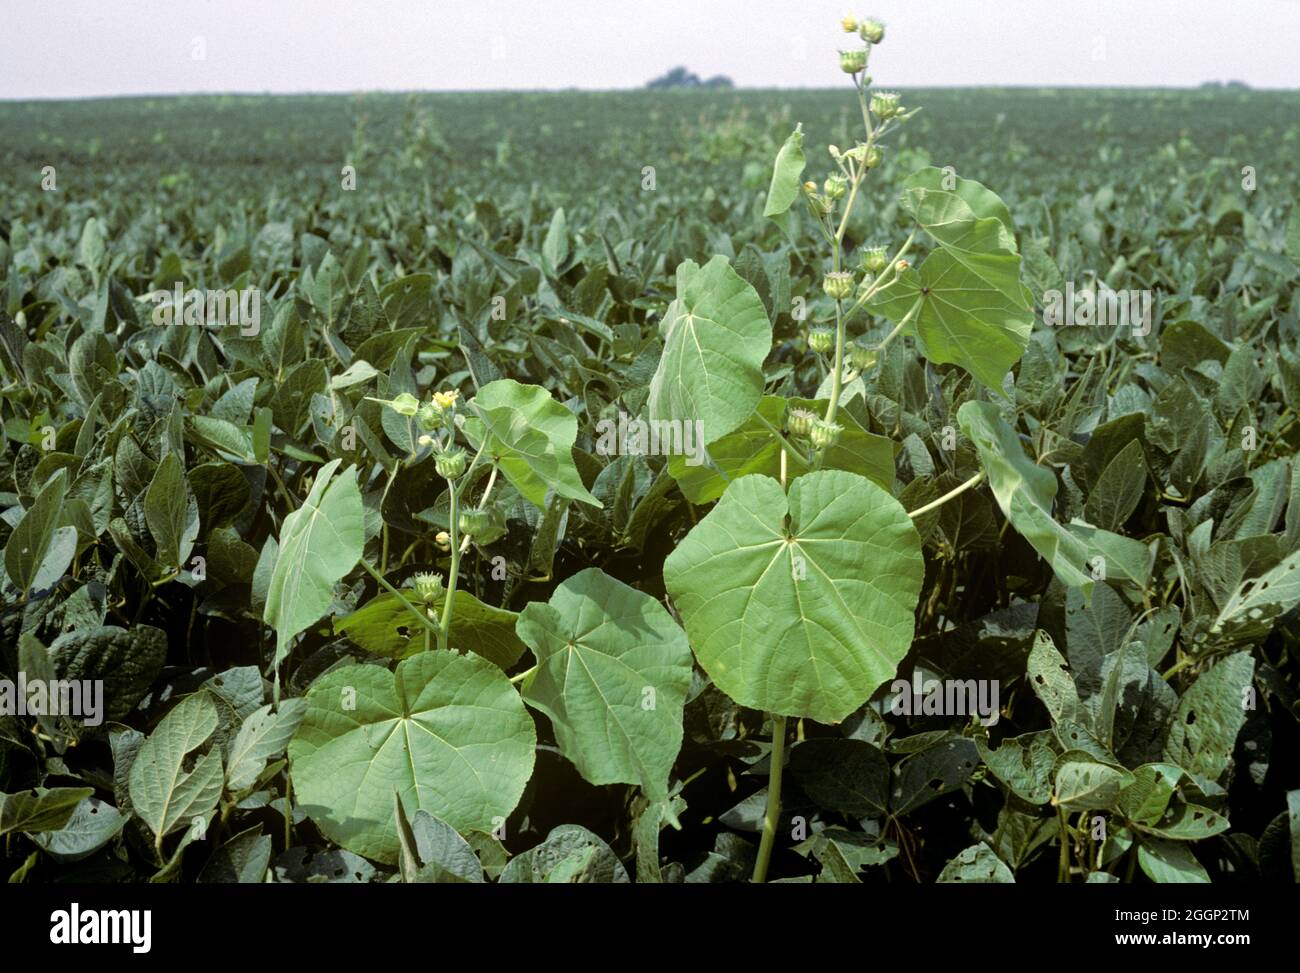 Velvet leaf (Abutilon theophrasti) yellow flowering broad-leaved weed in a maturing soybean crop, Illinois, USA Stock Photo